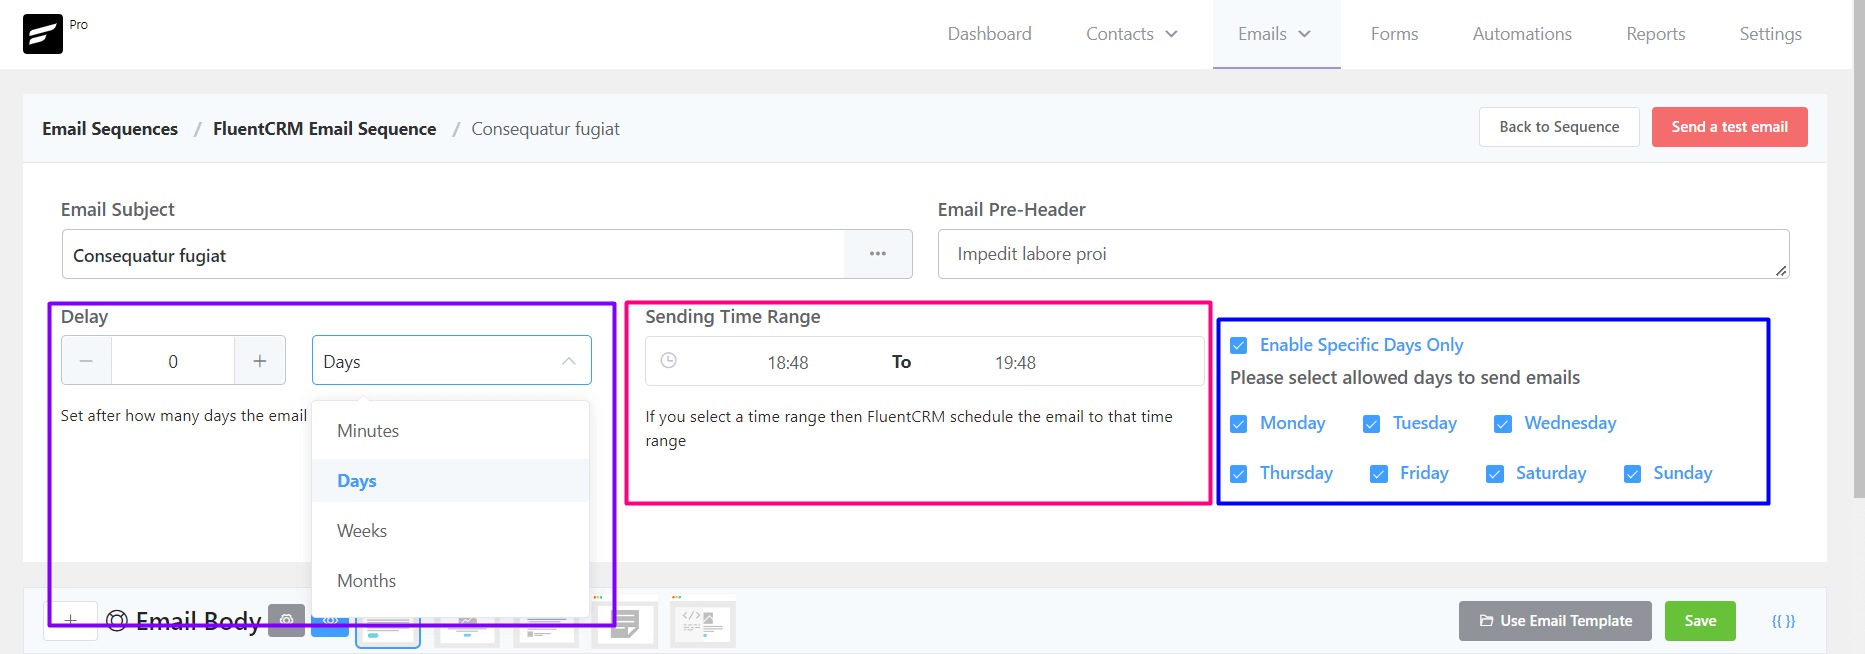 crm sequence settings